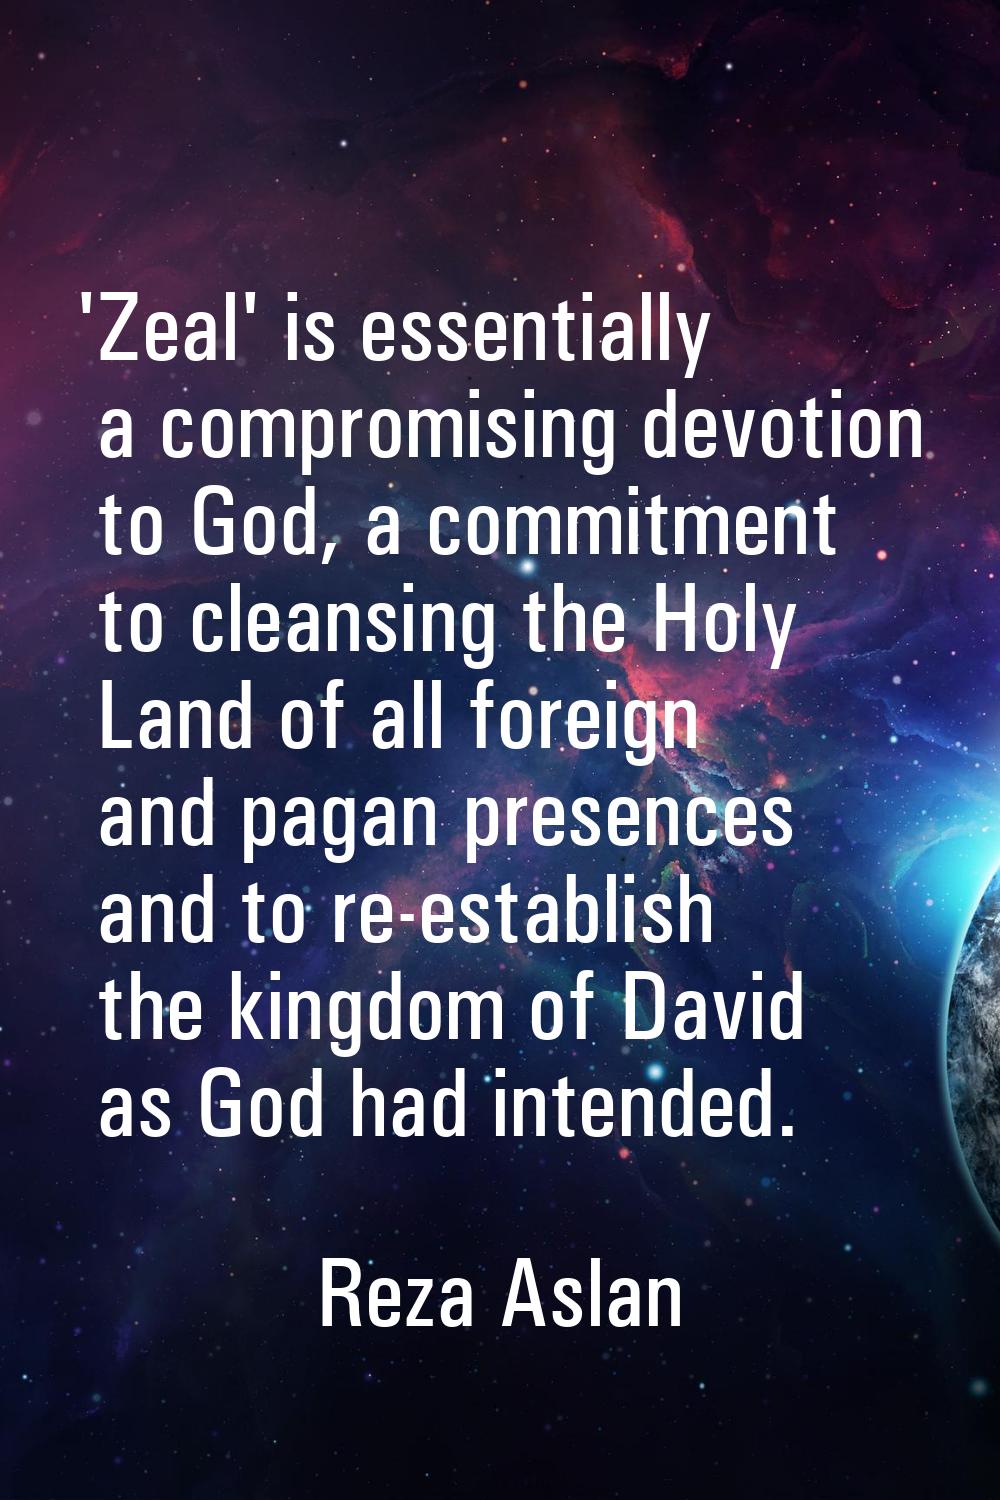 'Zeal' is essentially a compromising devotion to God, a commitment to cleansing the Holy Land of al